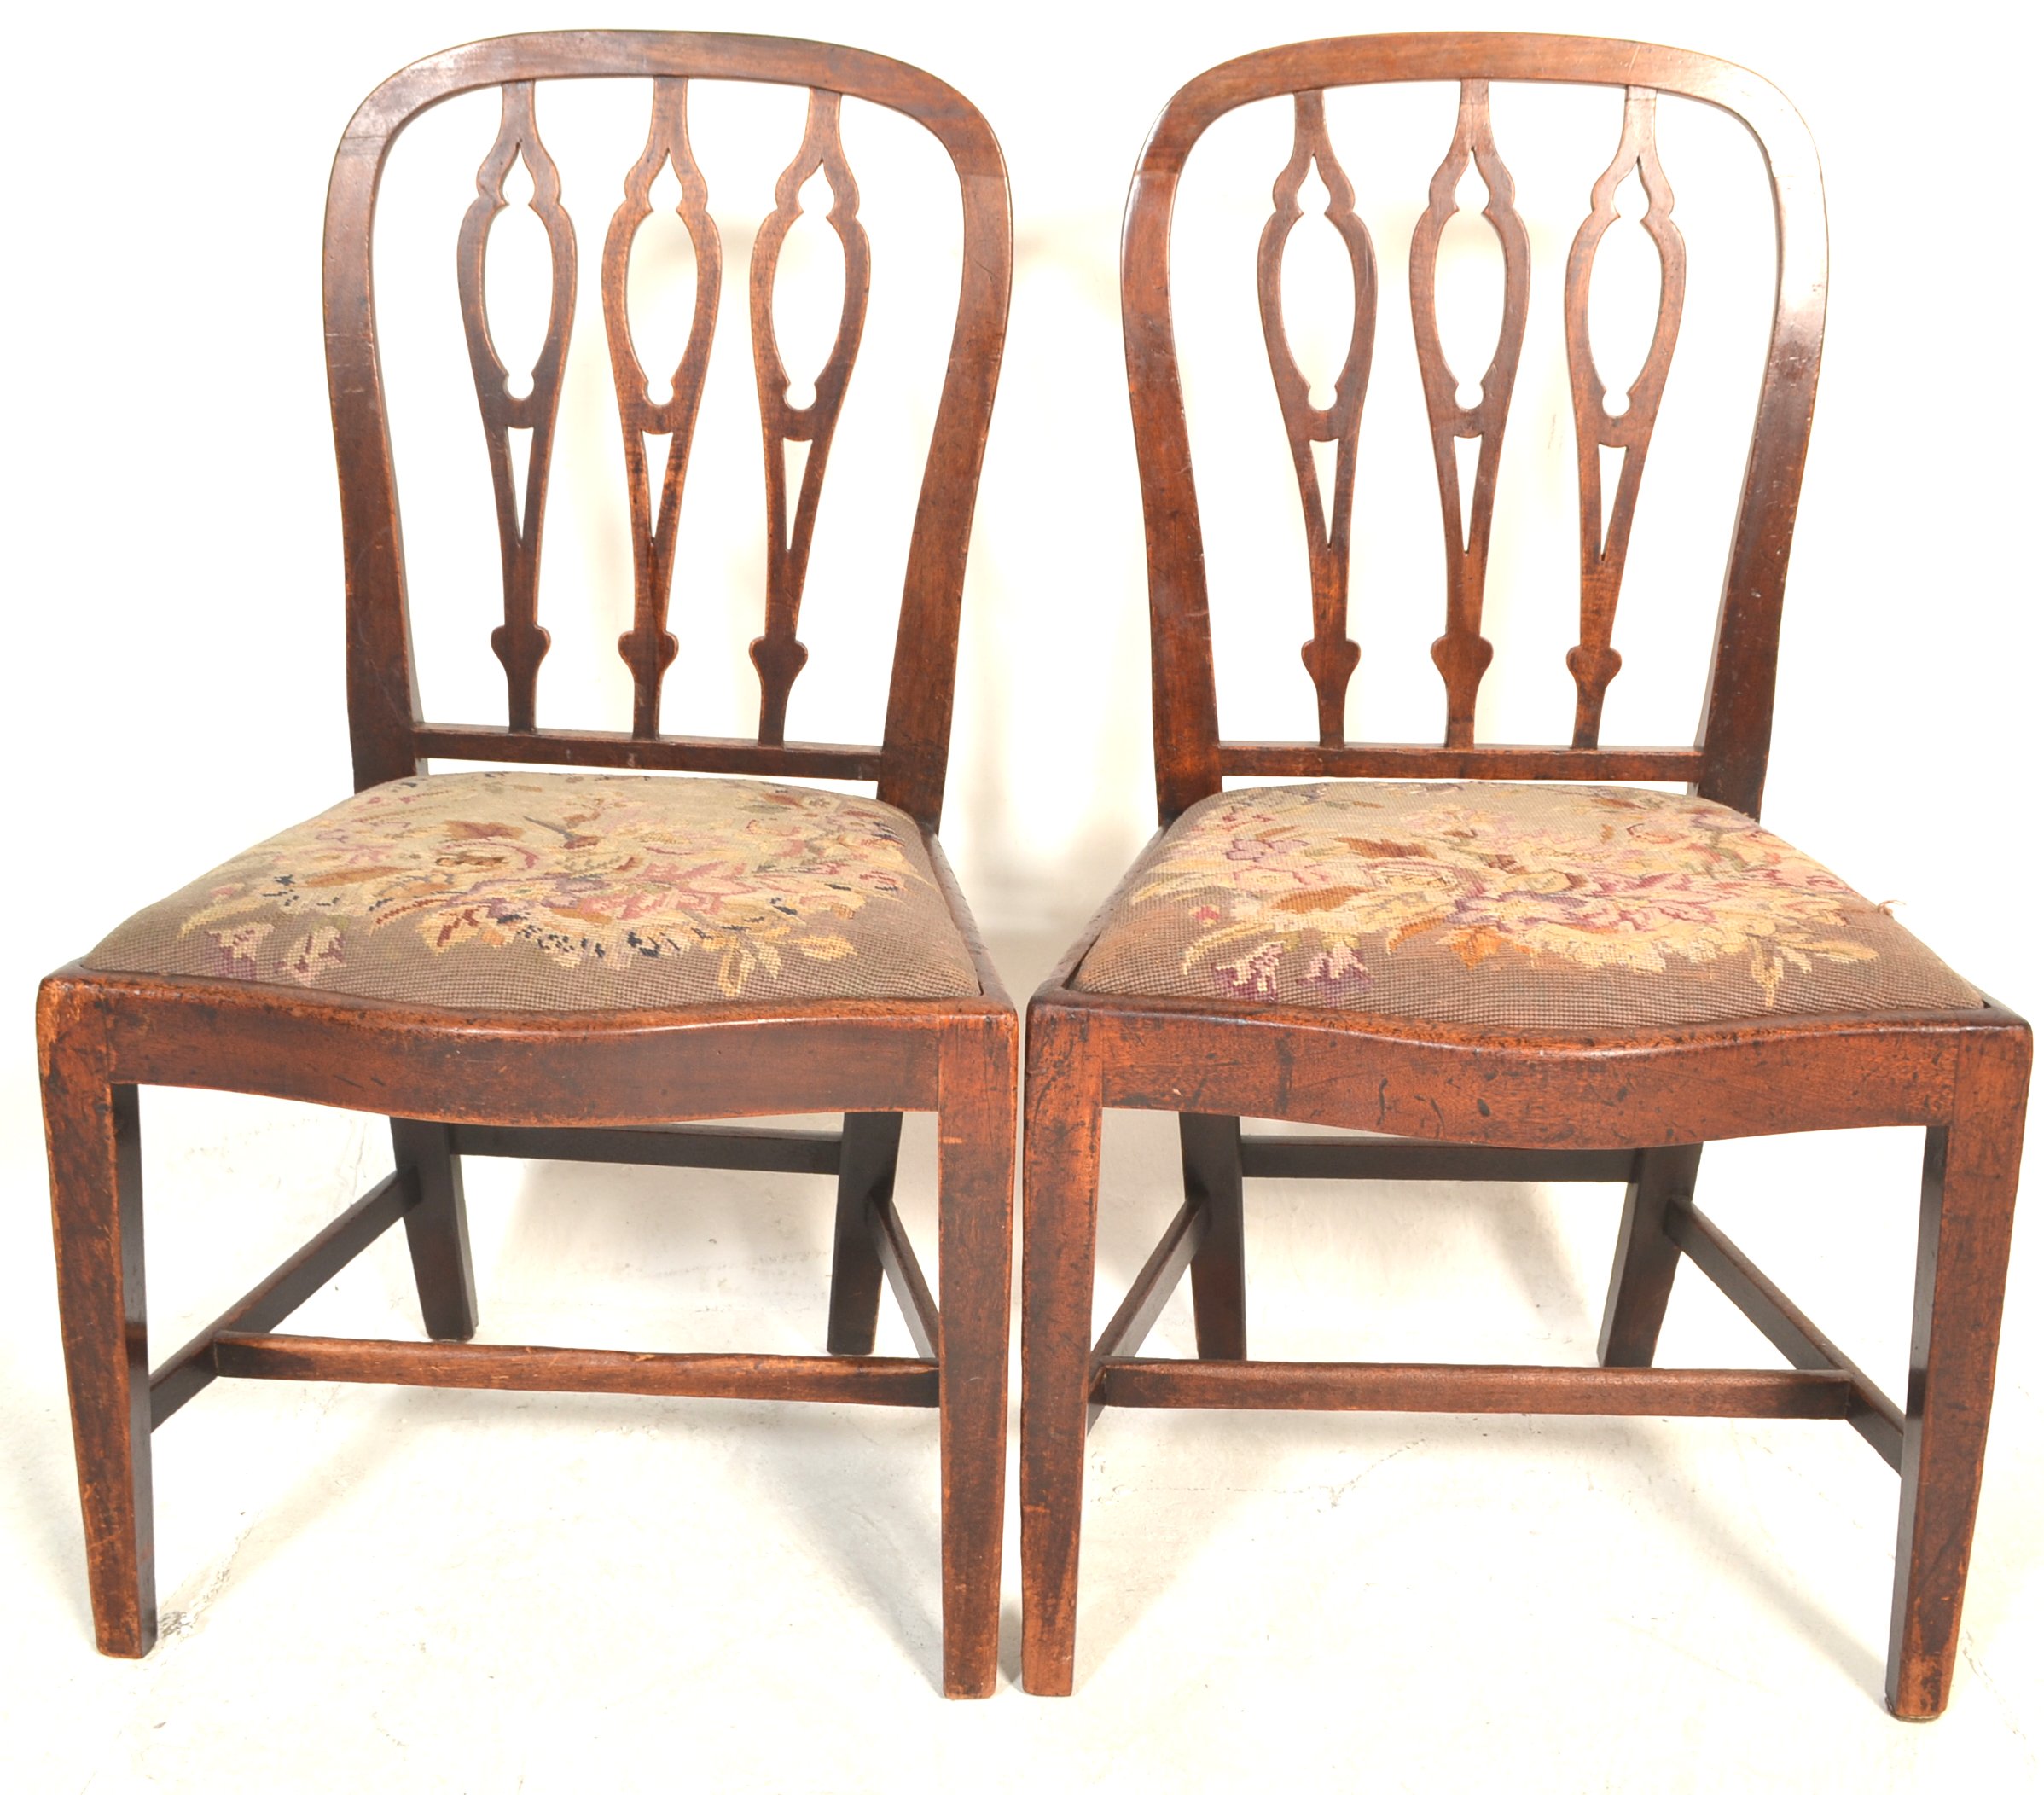 SET OF 6 19TH CENTURY GEORGE III MAHOGANY DINING CHAIRS - Image 12 of 32